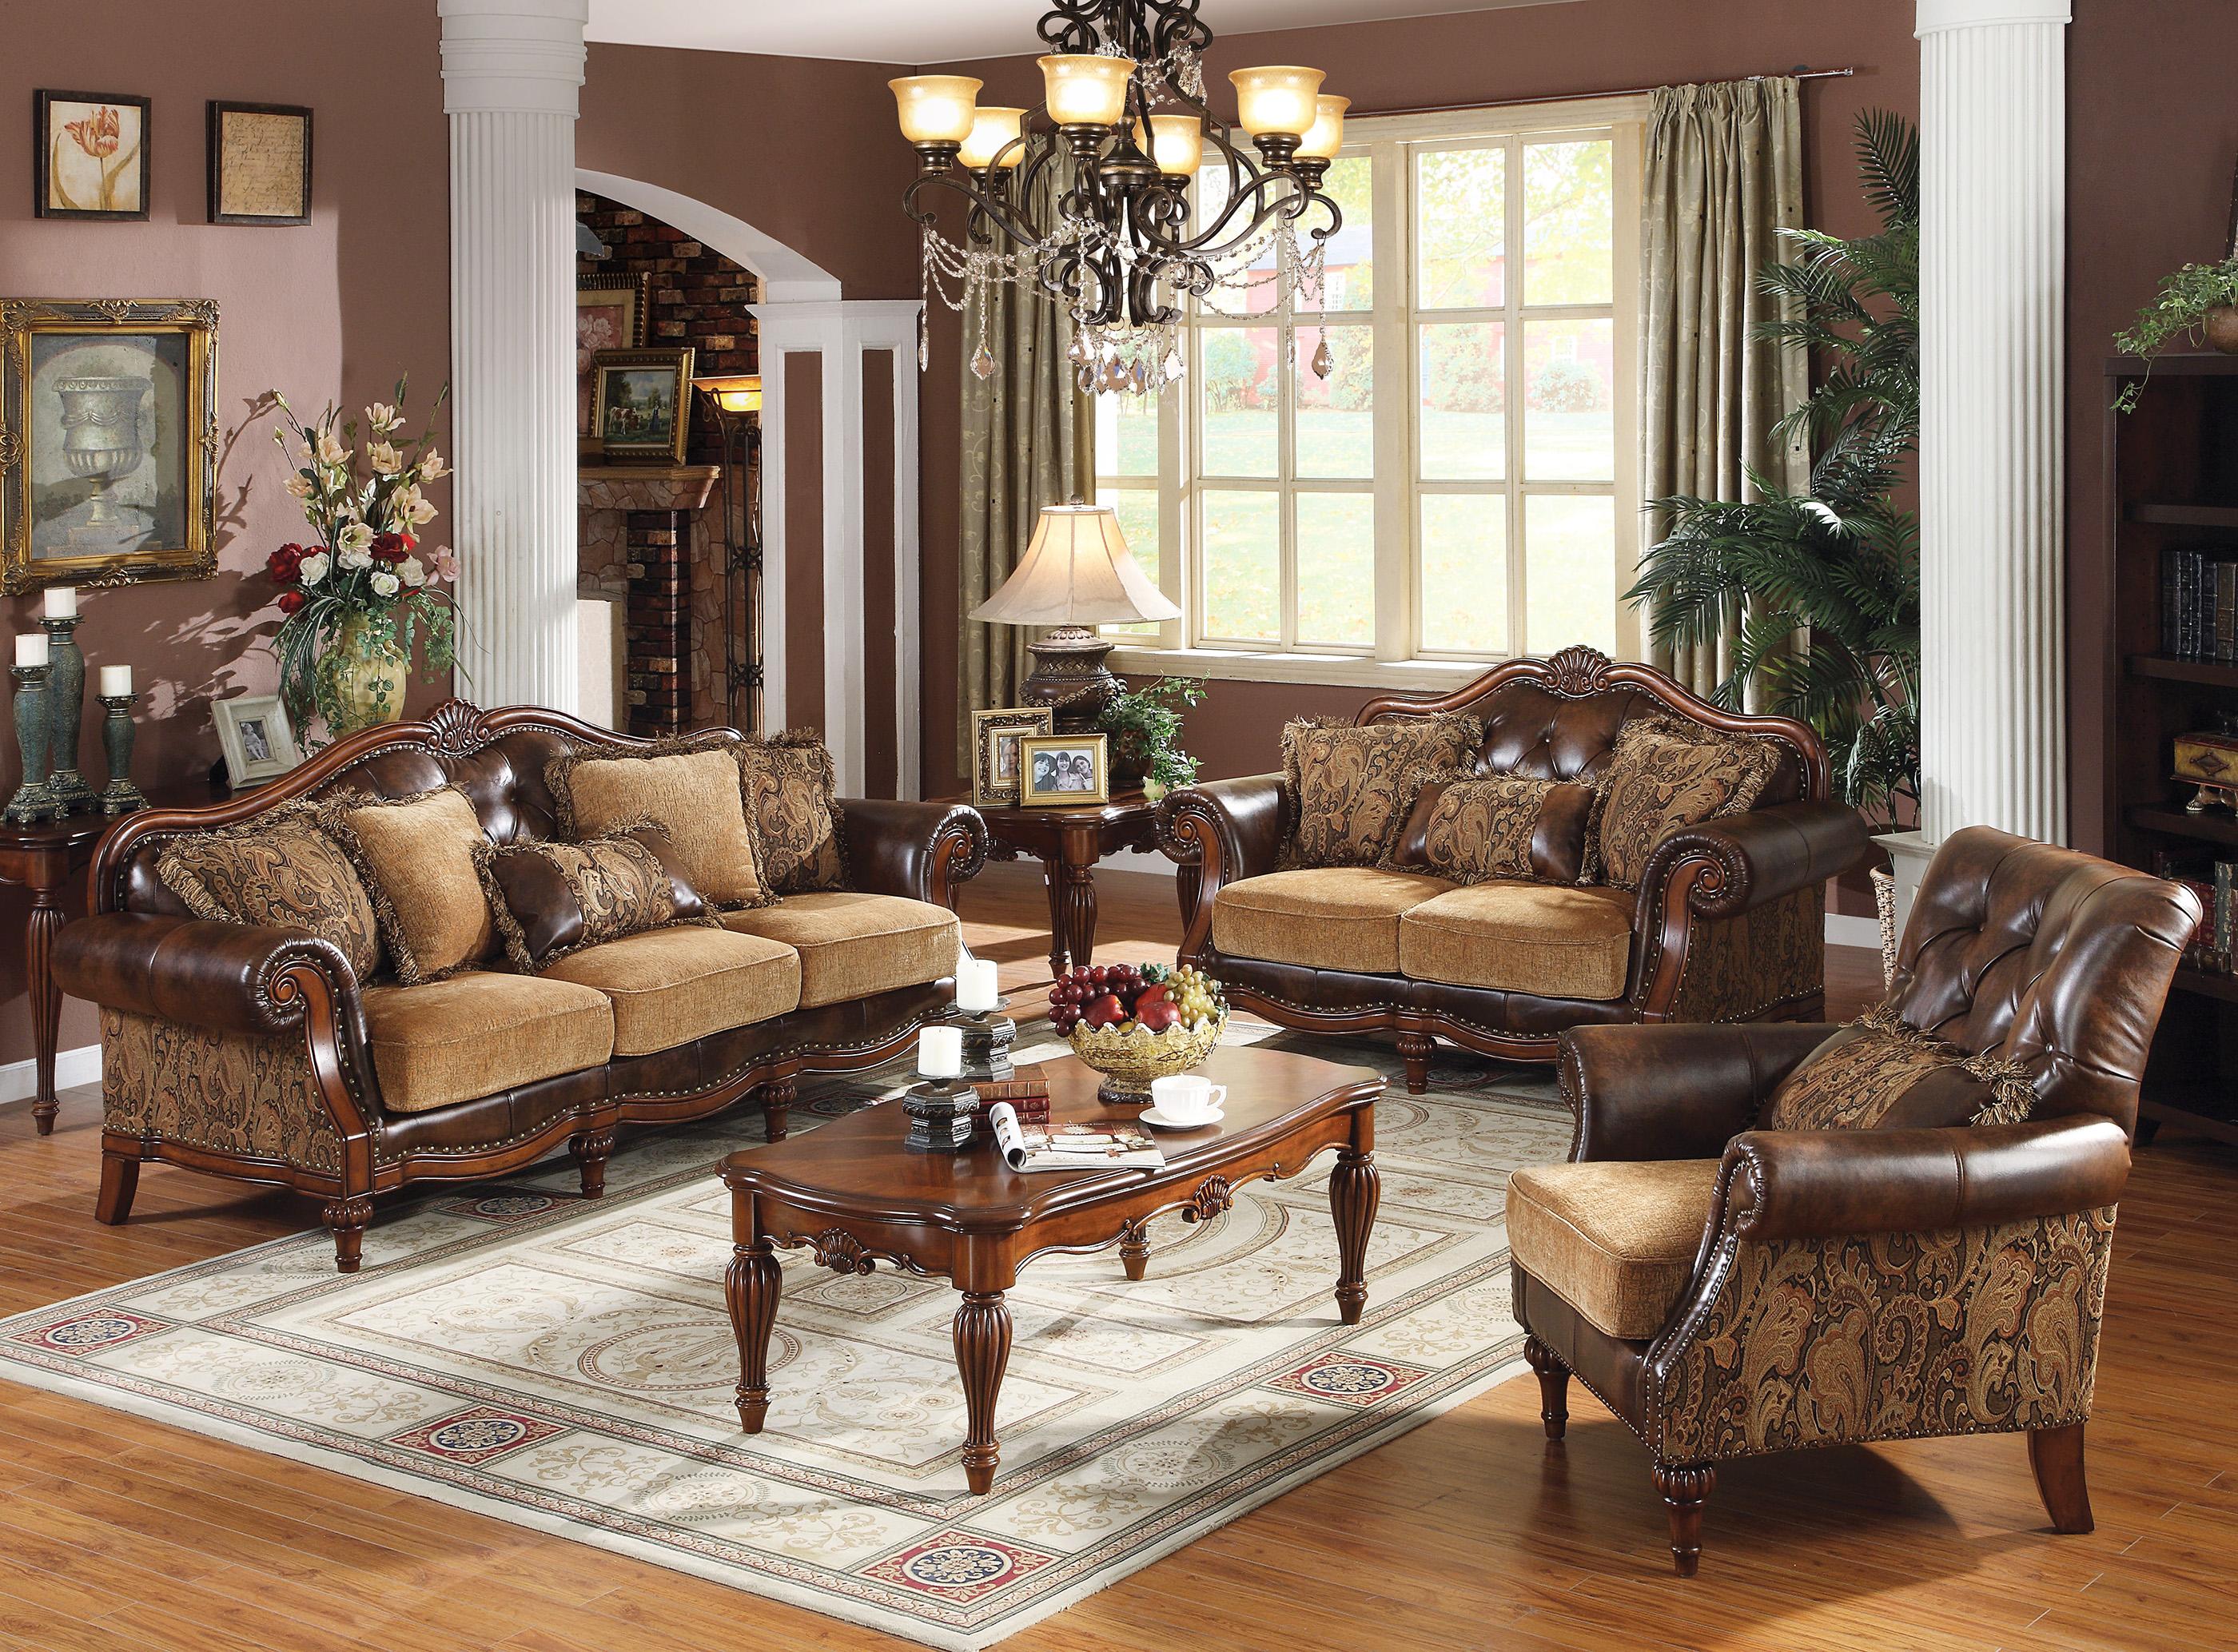 Classic, Traditional Sofa Loveseat and Chair Set Dreena 05495 Dreena-05495-Set-3 in Cherry, Brown Bonded Leather